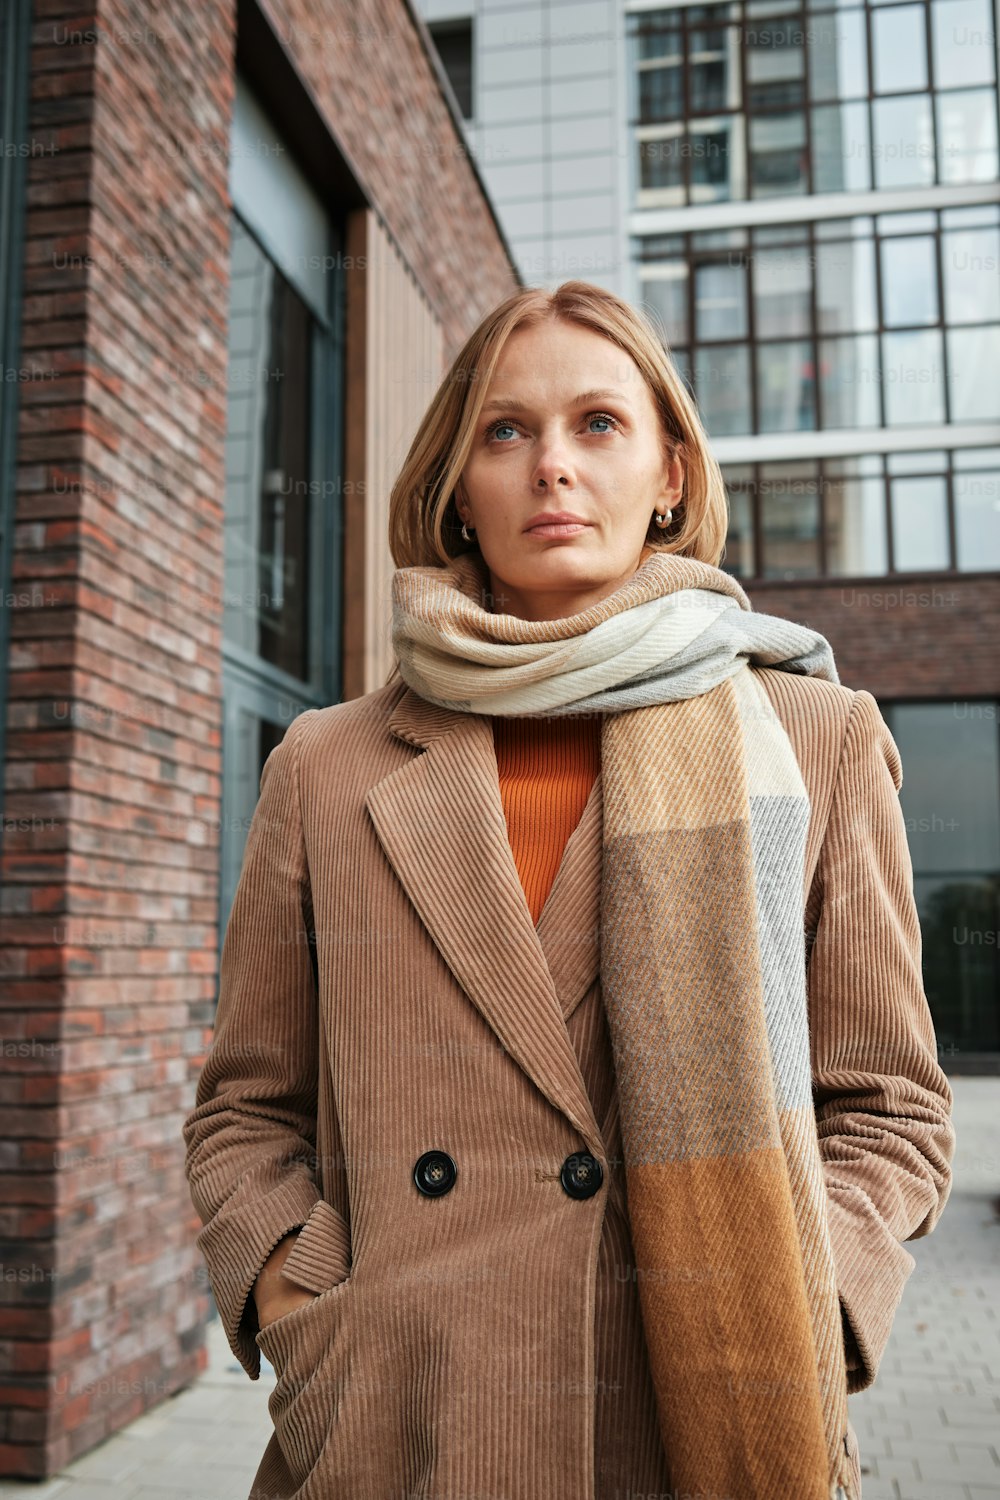 a woman wearing a coat and scarf standing in front of a brick building